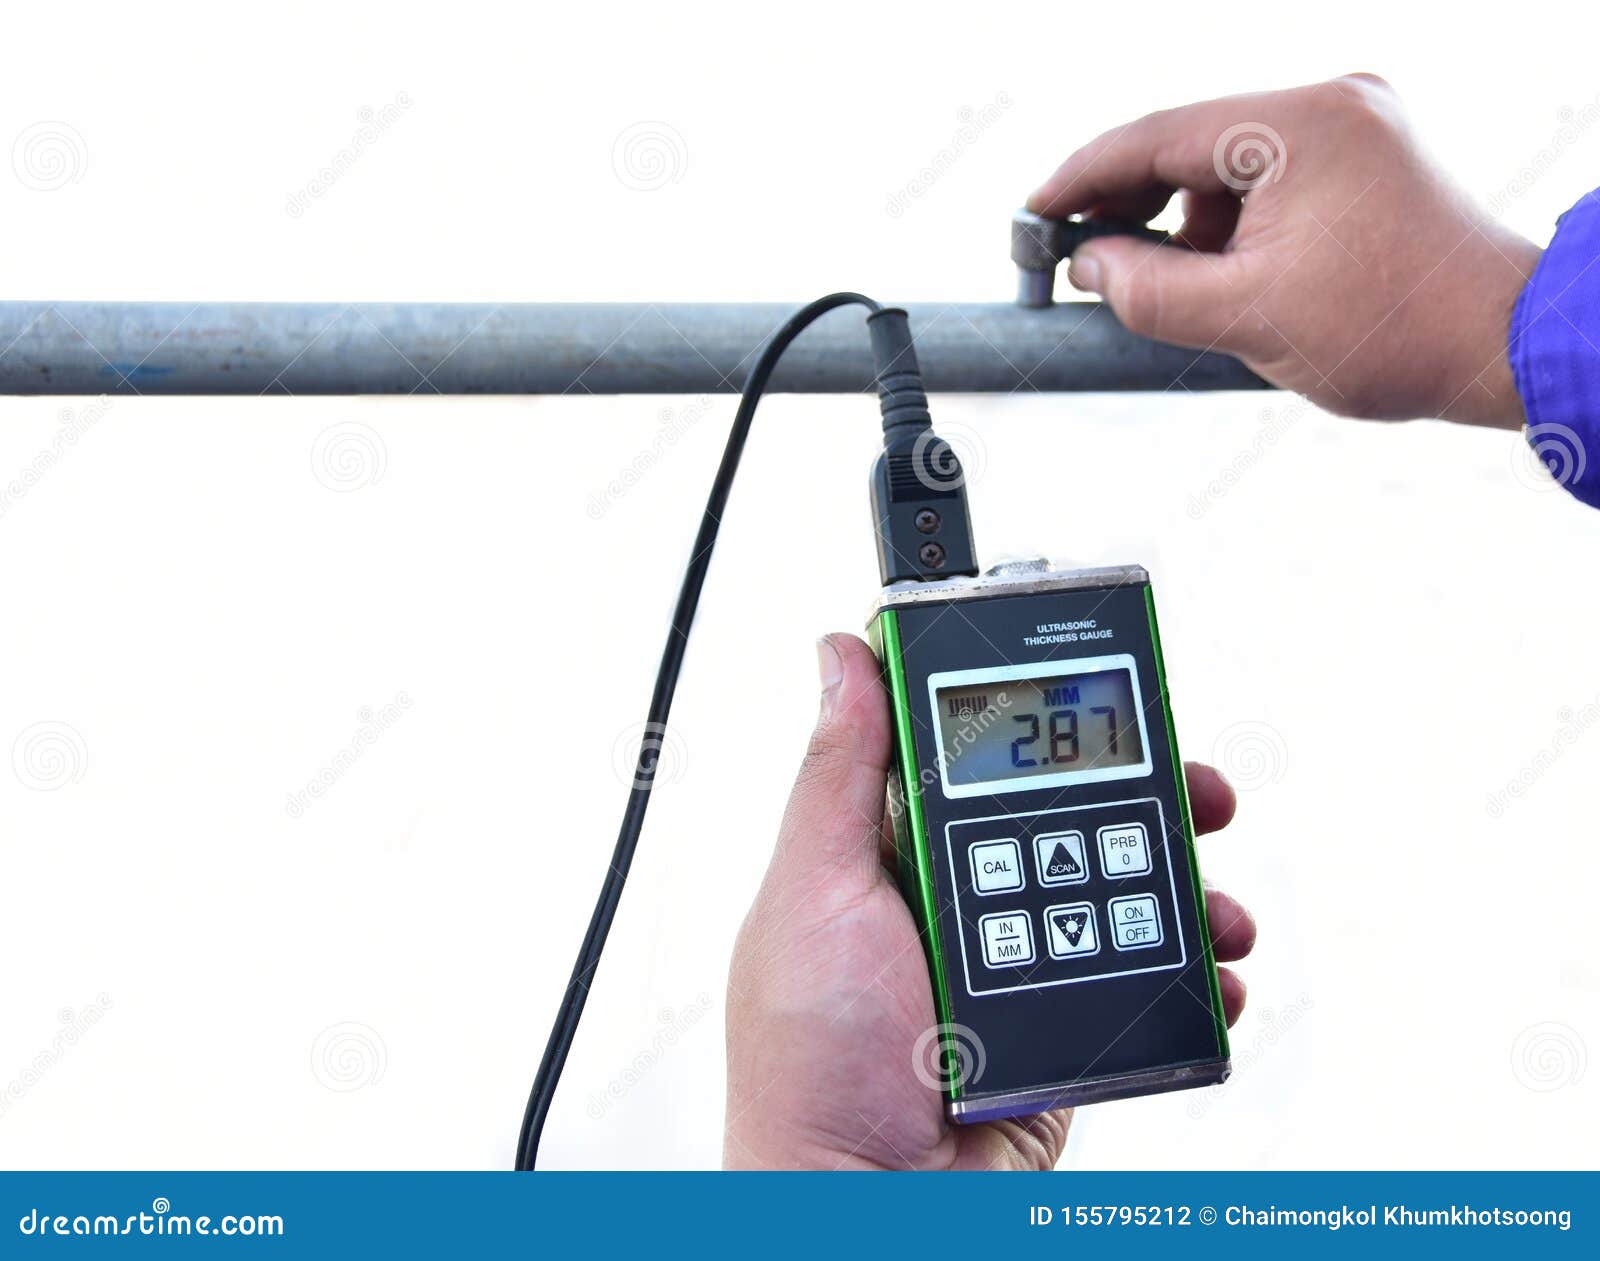 pipe thickness measurement with utm